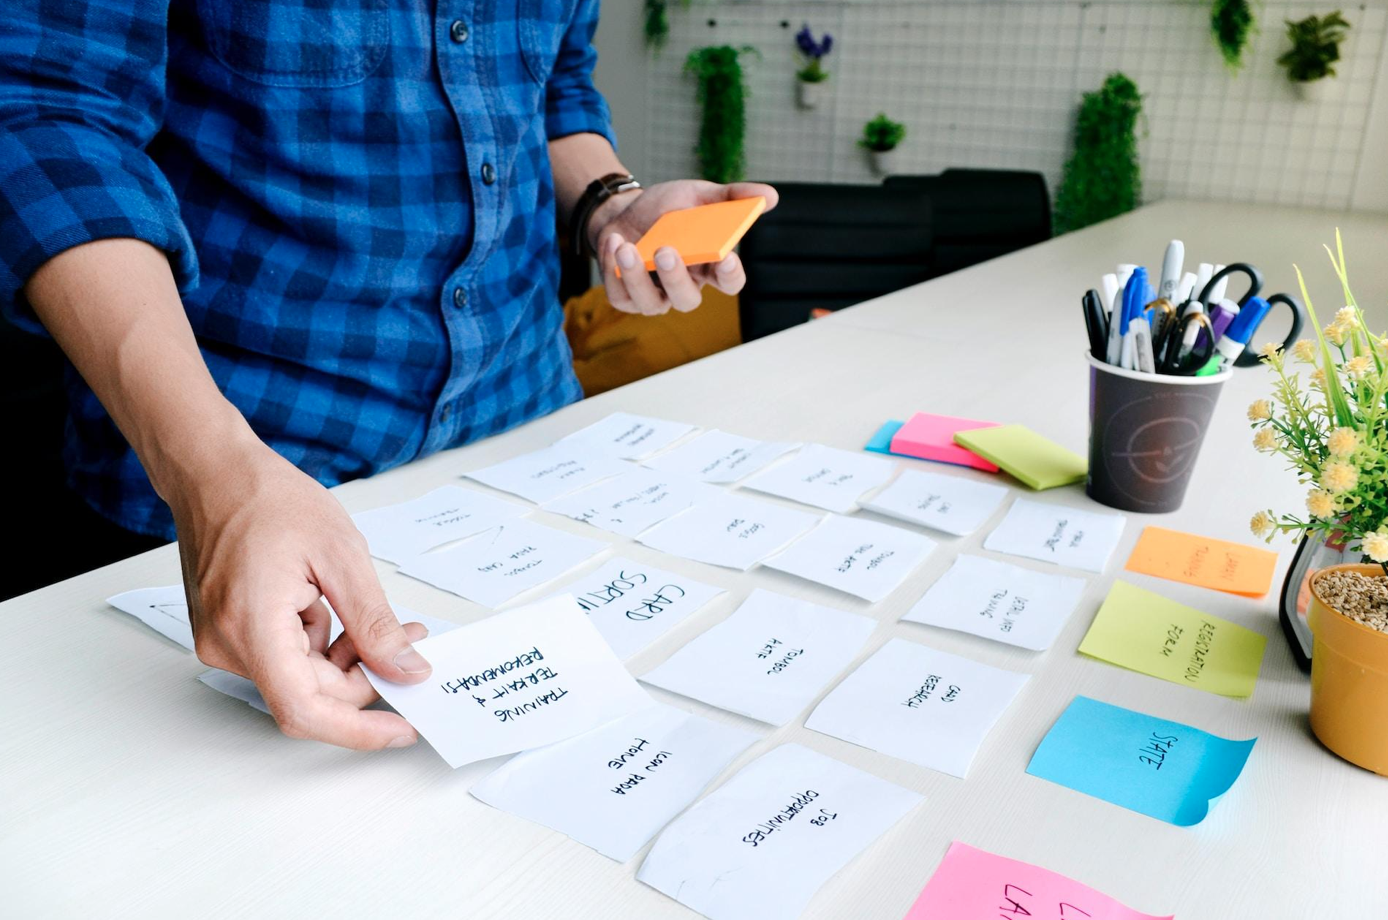 Man standing at counter reviewing post-it notes; image by UX Indonesia, via Unsplash.com.